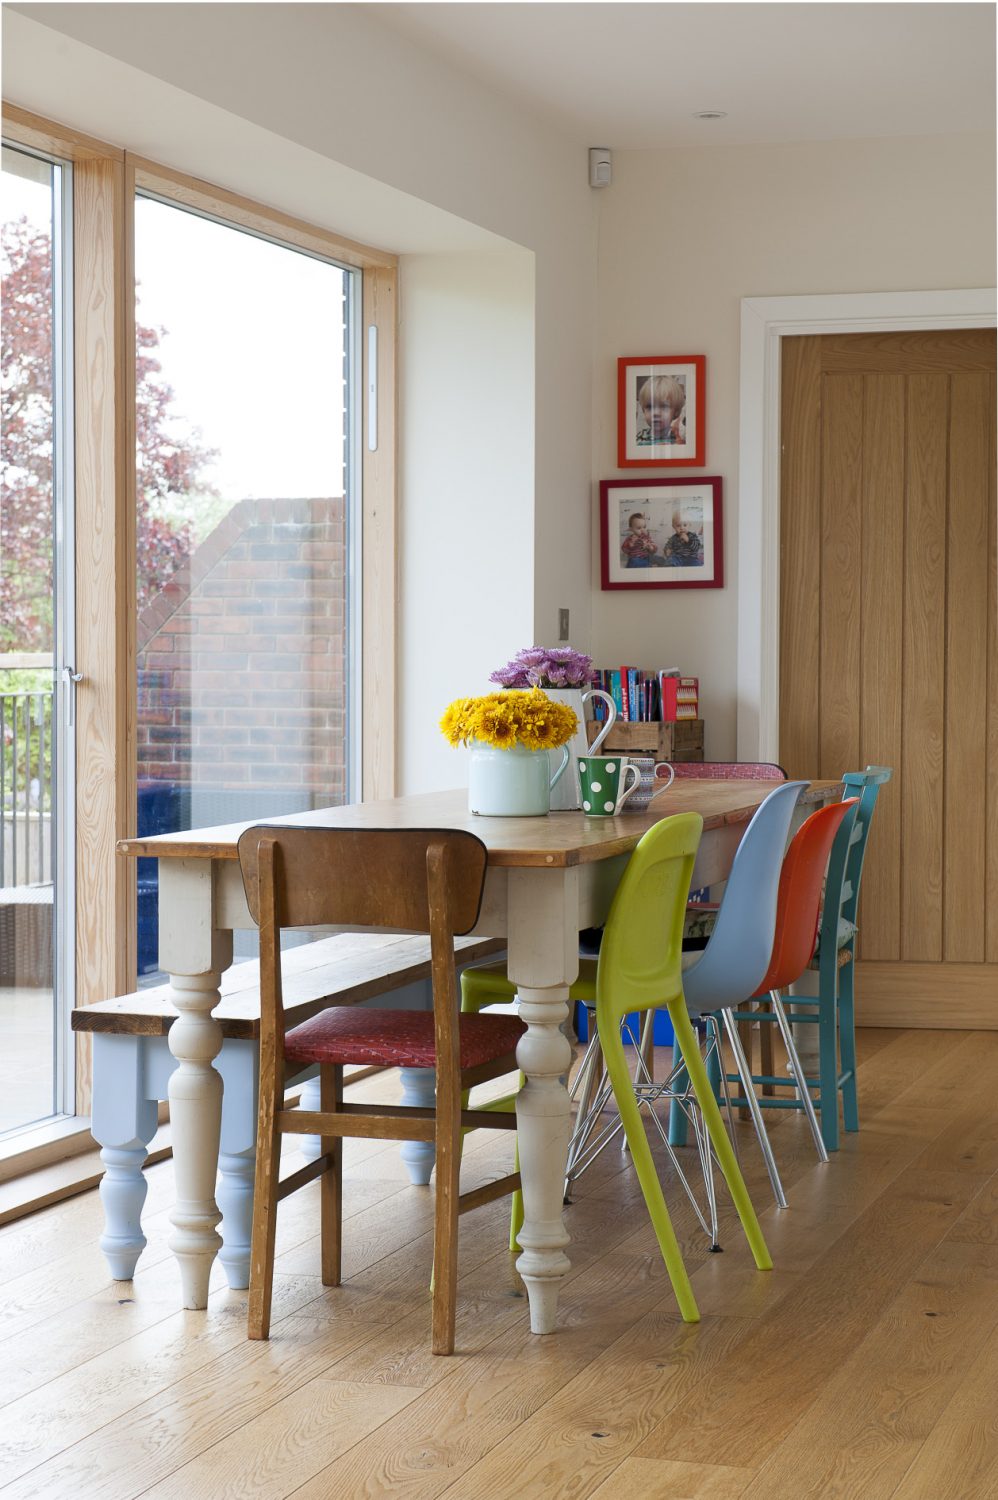 On one side of the pine dining table gather a mix of plastic and metal 1950s/60s and Ikea chairs